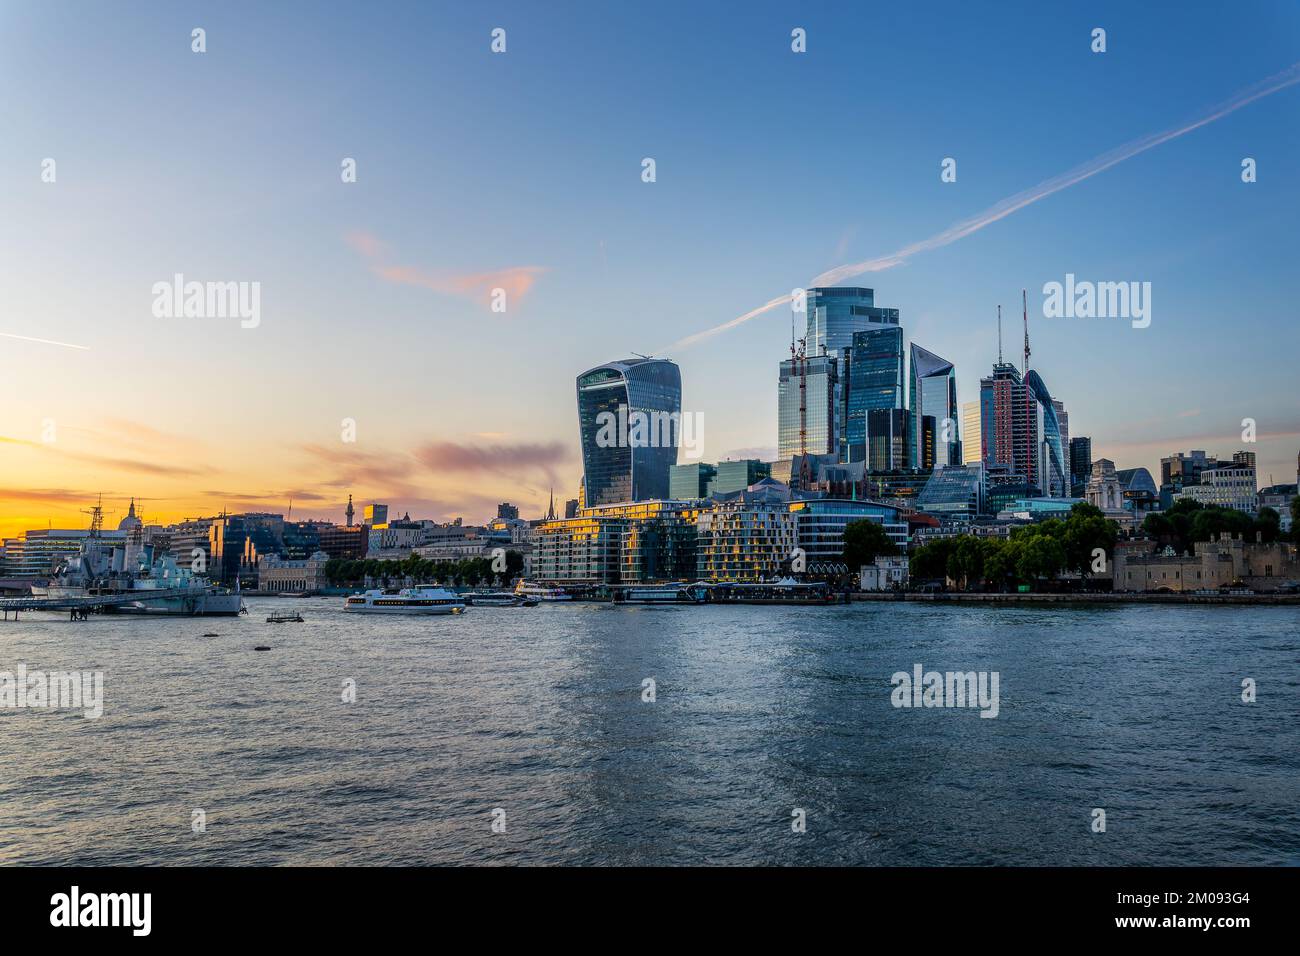 The City of London and the river Thames at sunset, in London, UK Stock Photo